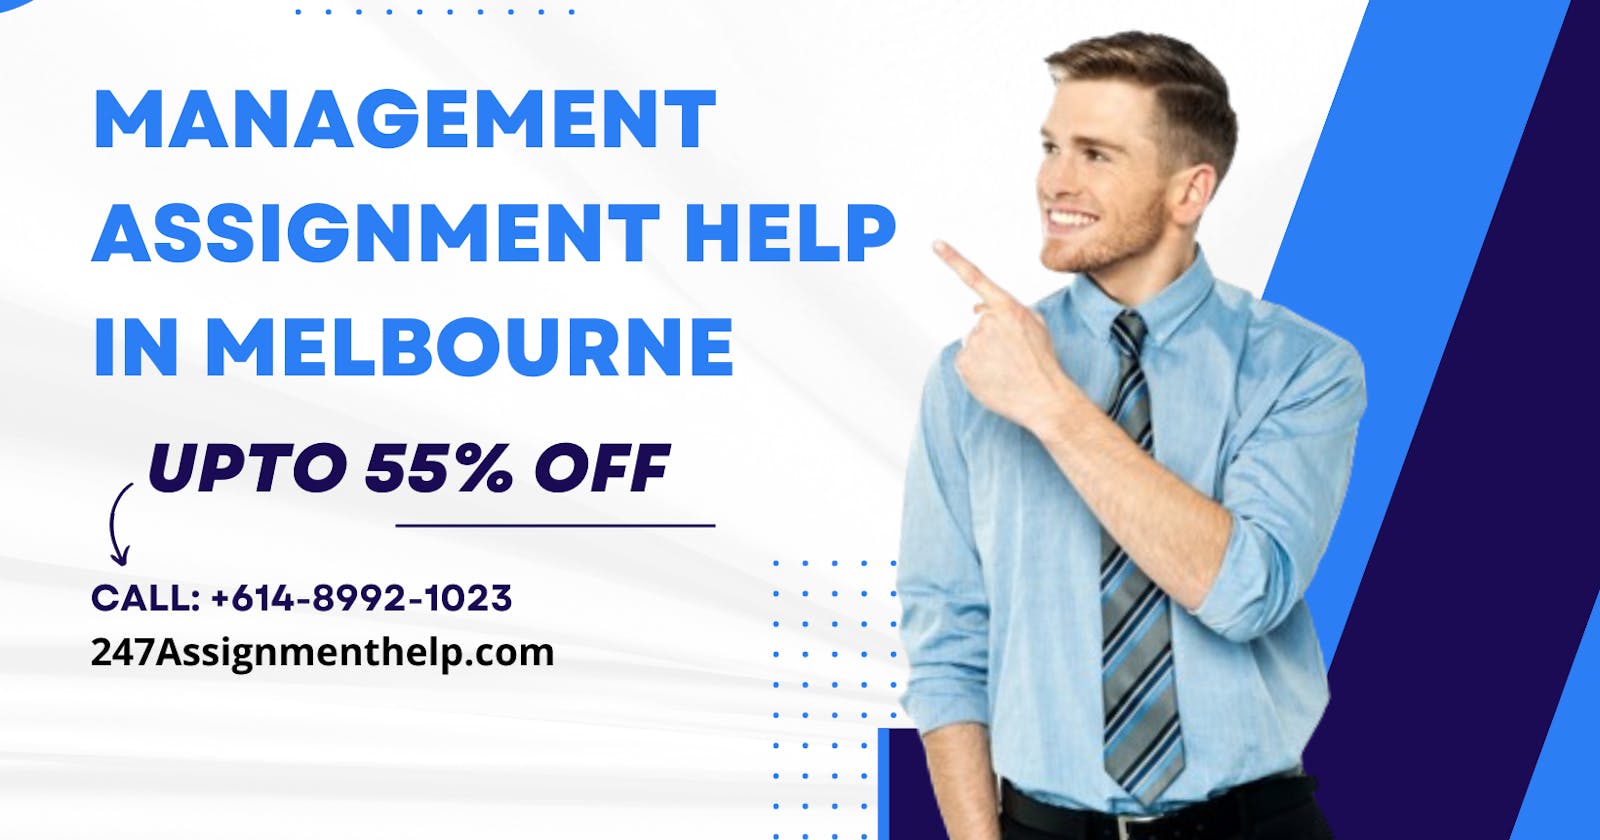 Management Assignment Help in Melbourne Upto 55% Off